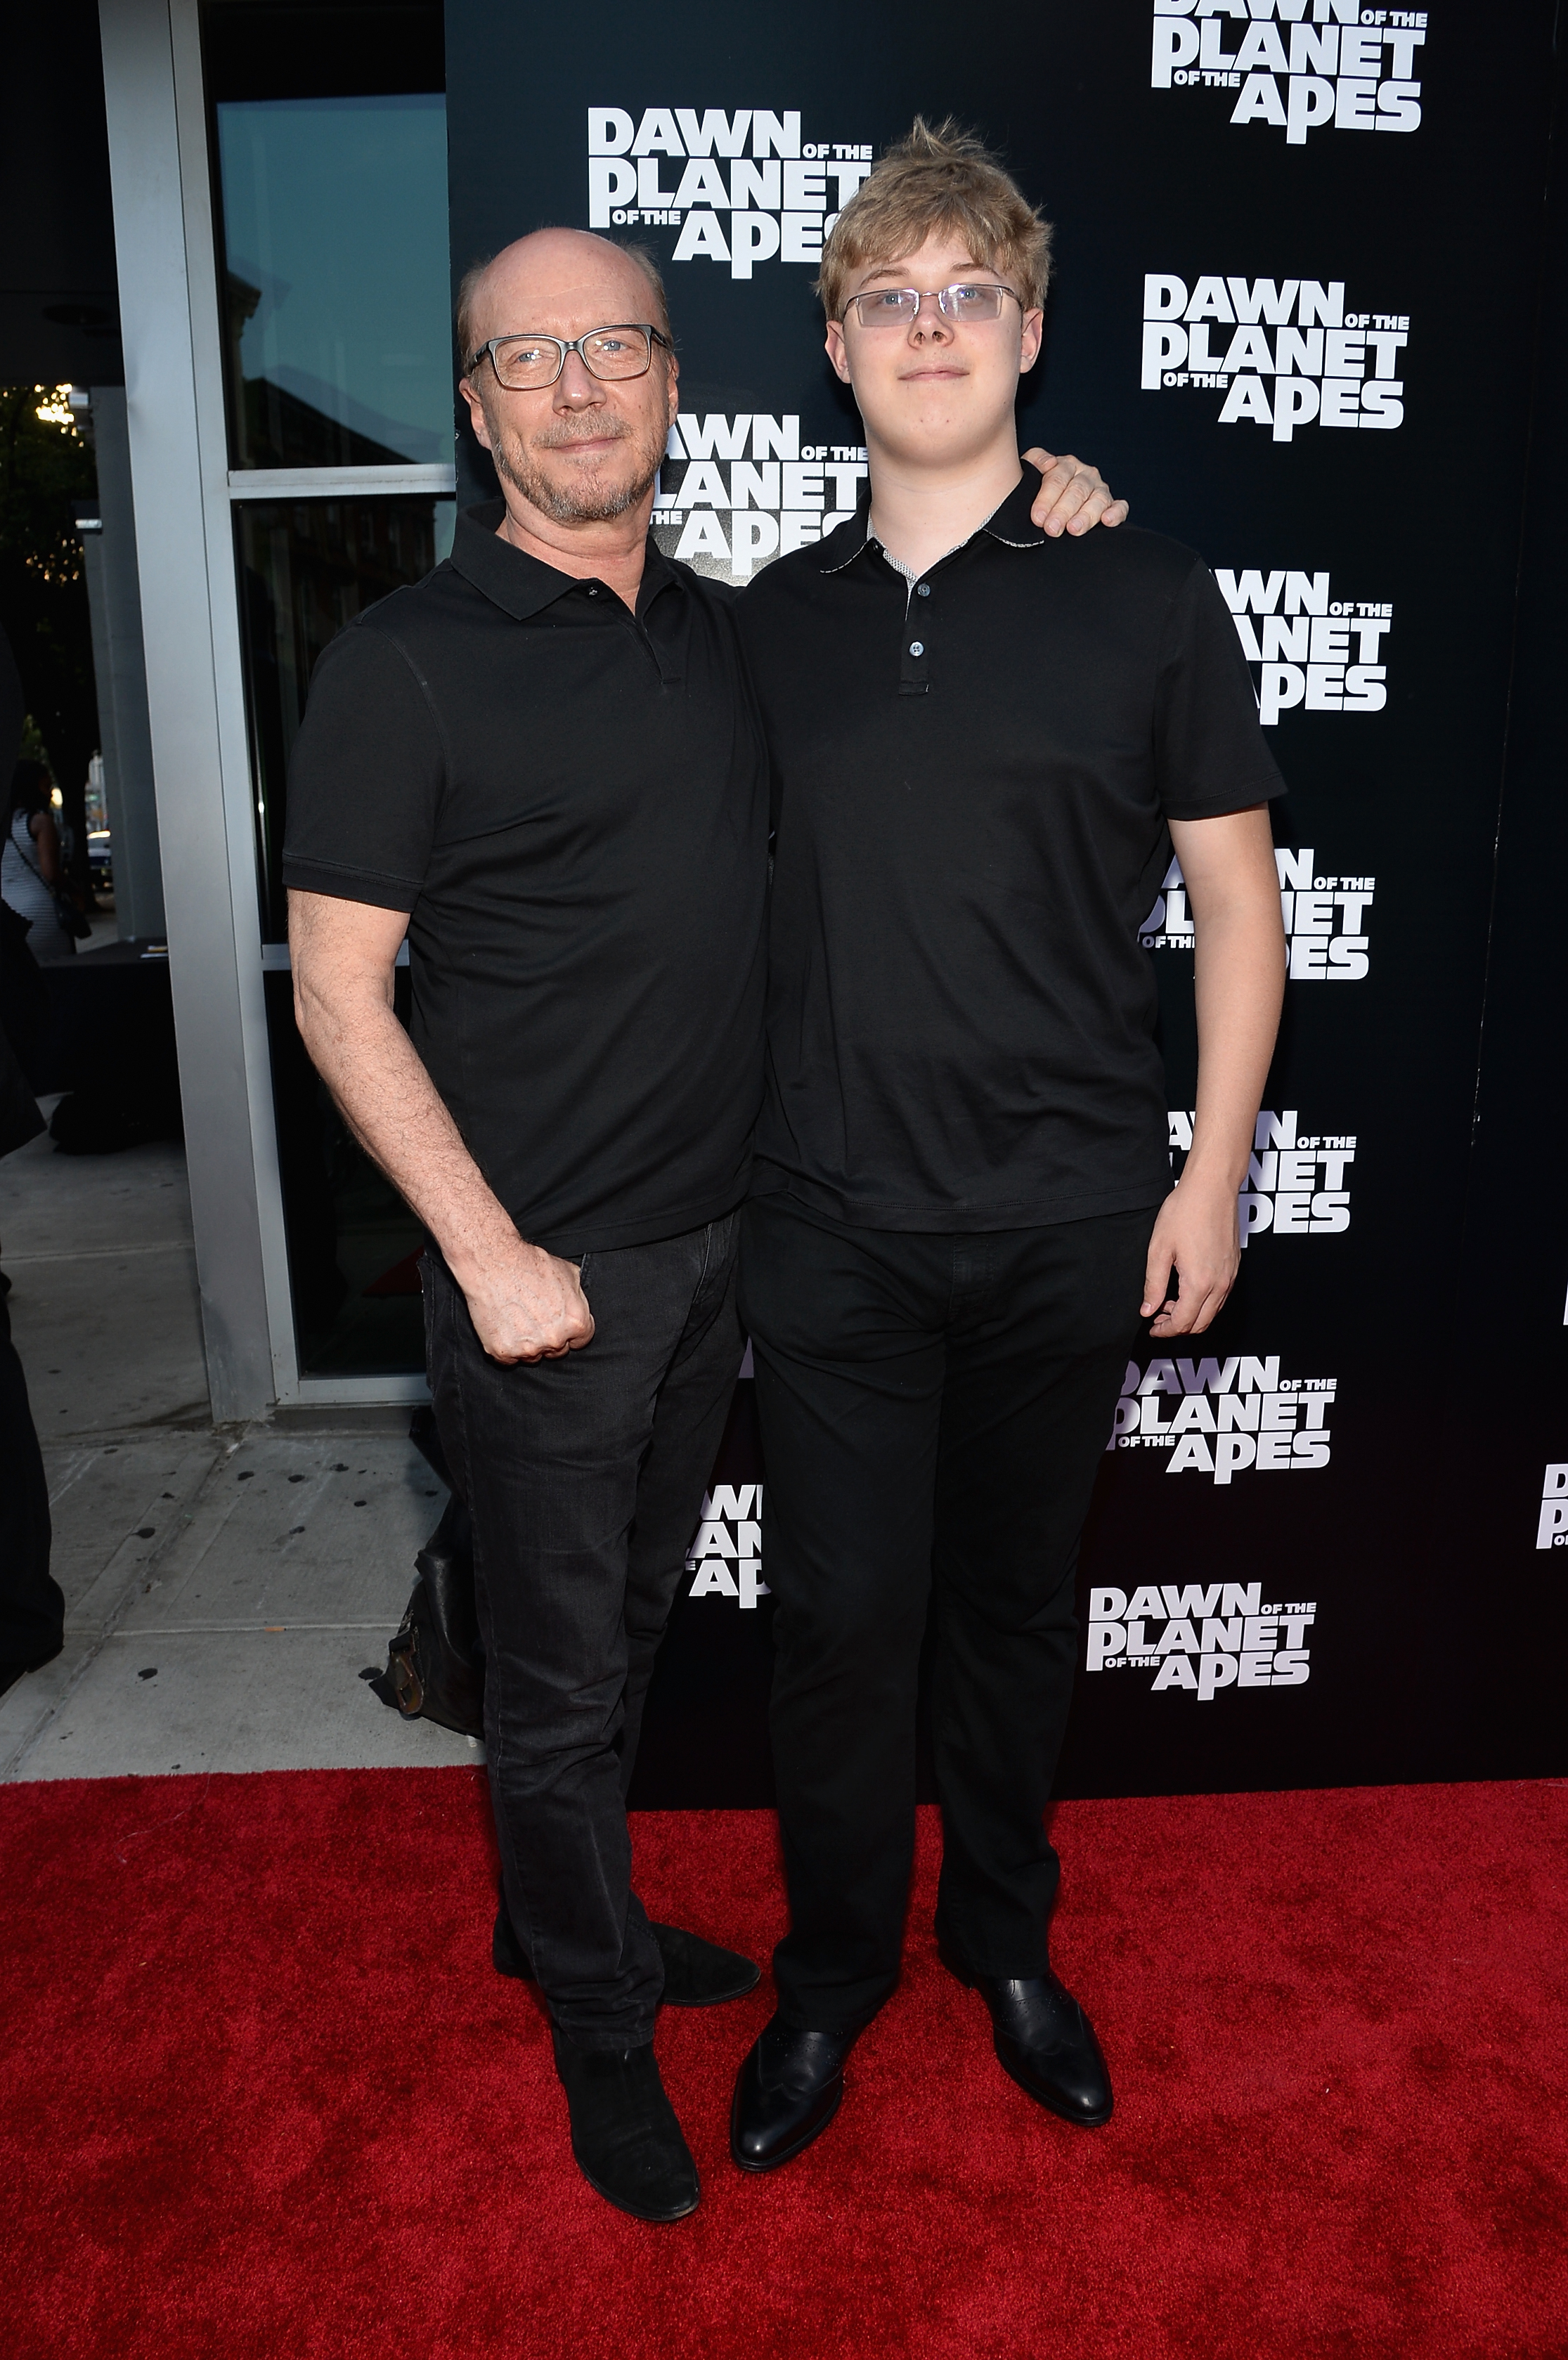 Paul and James Haggis at the "Dawn Of The Planets Of The Apes" premiere on July 8, 2014, in New York City | Source: Getty Images